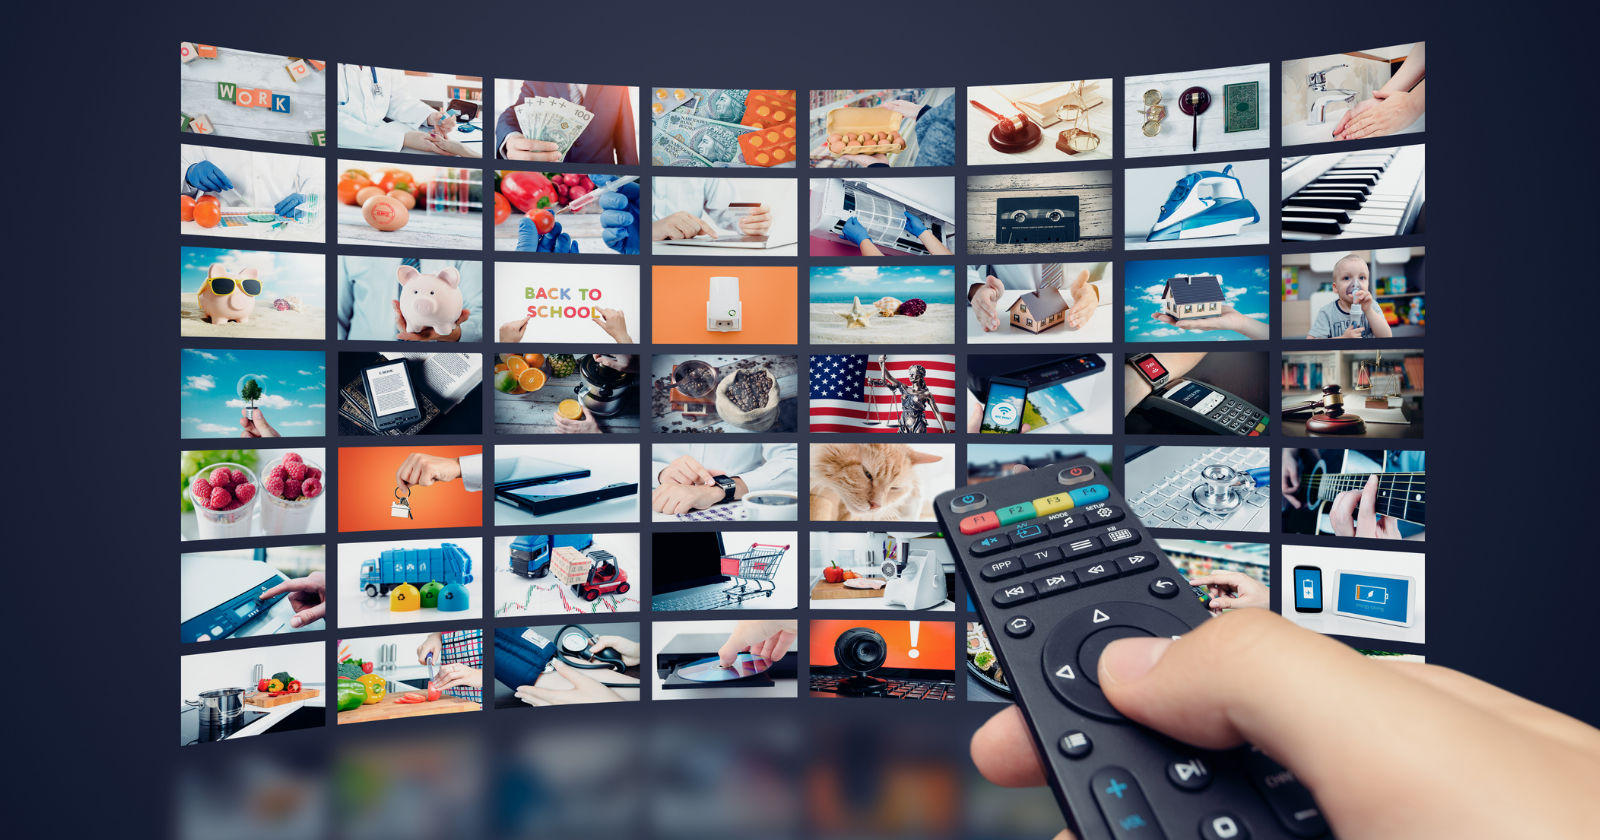 The 15 Best VOD Platforms for Video On Demand in 2021 | Dacast